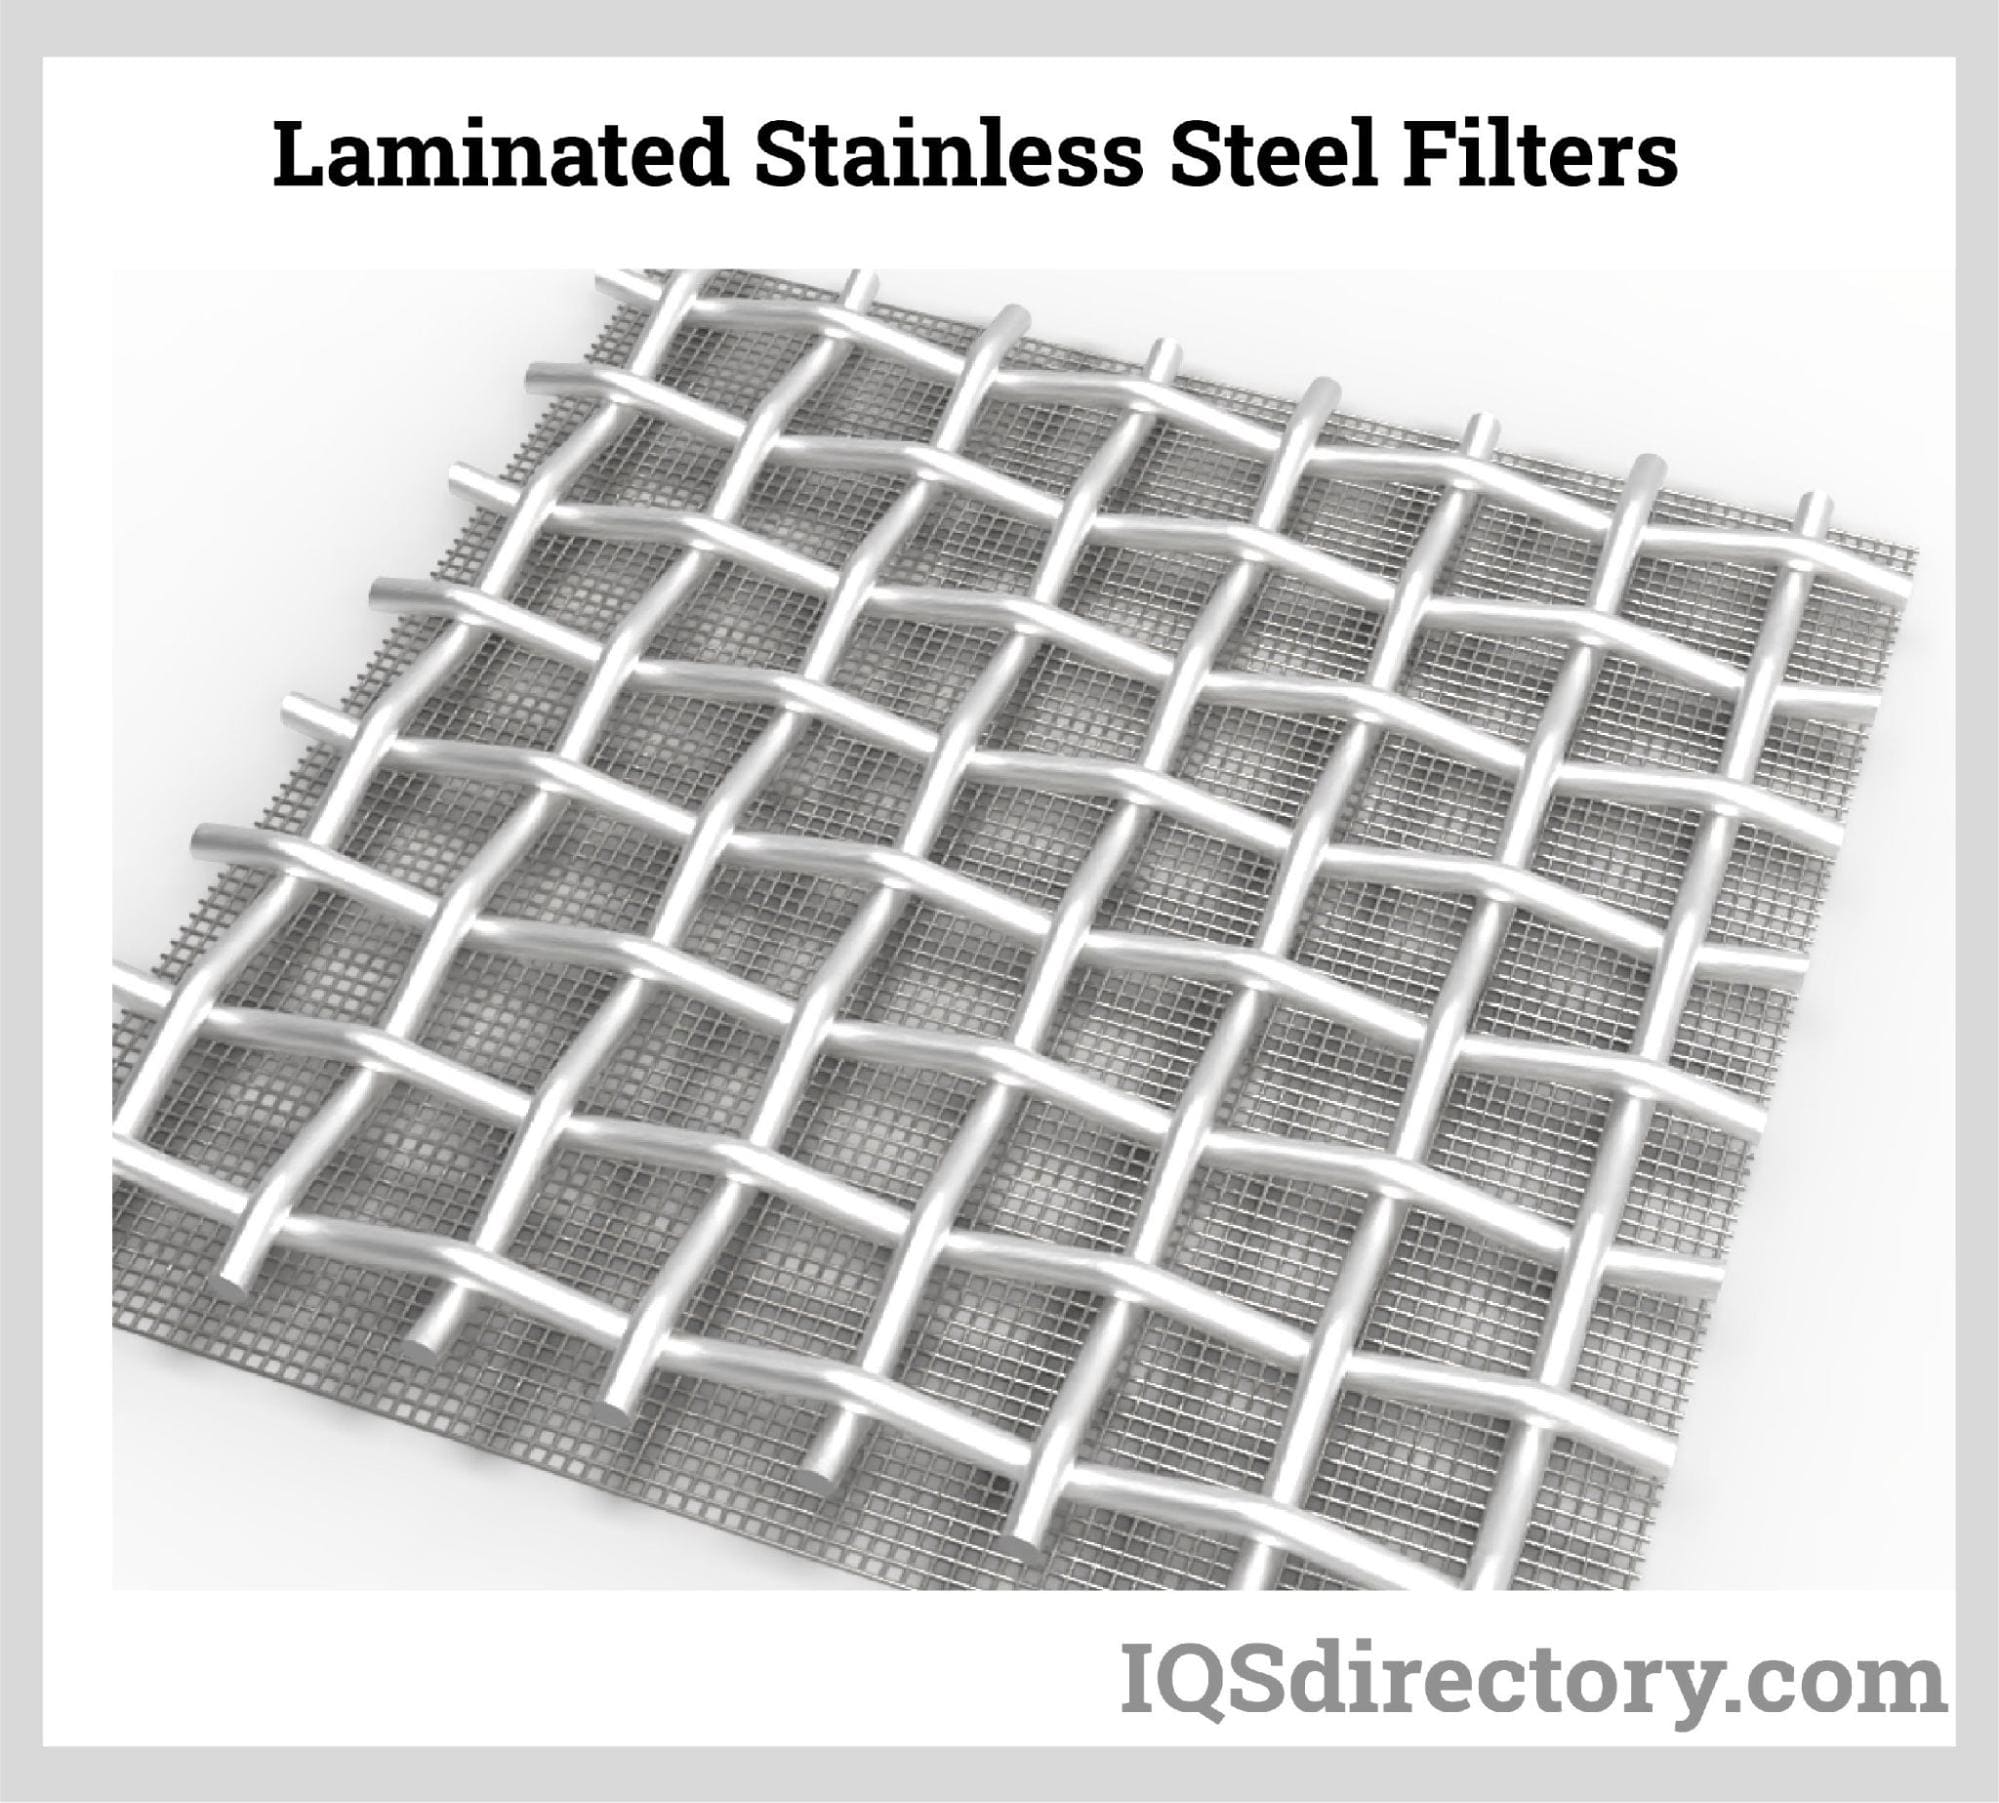 Laminated Stainless Steel Filters